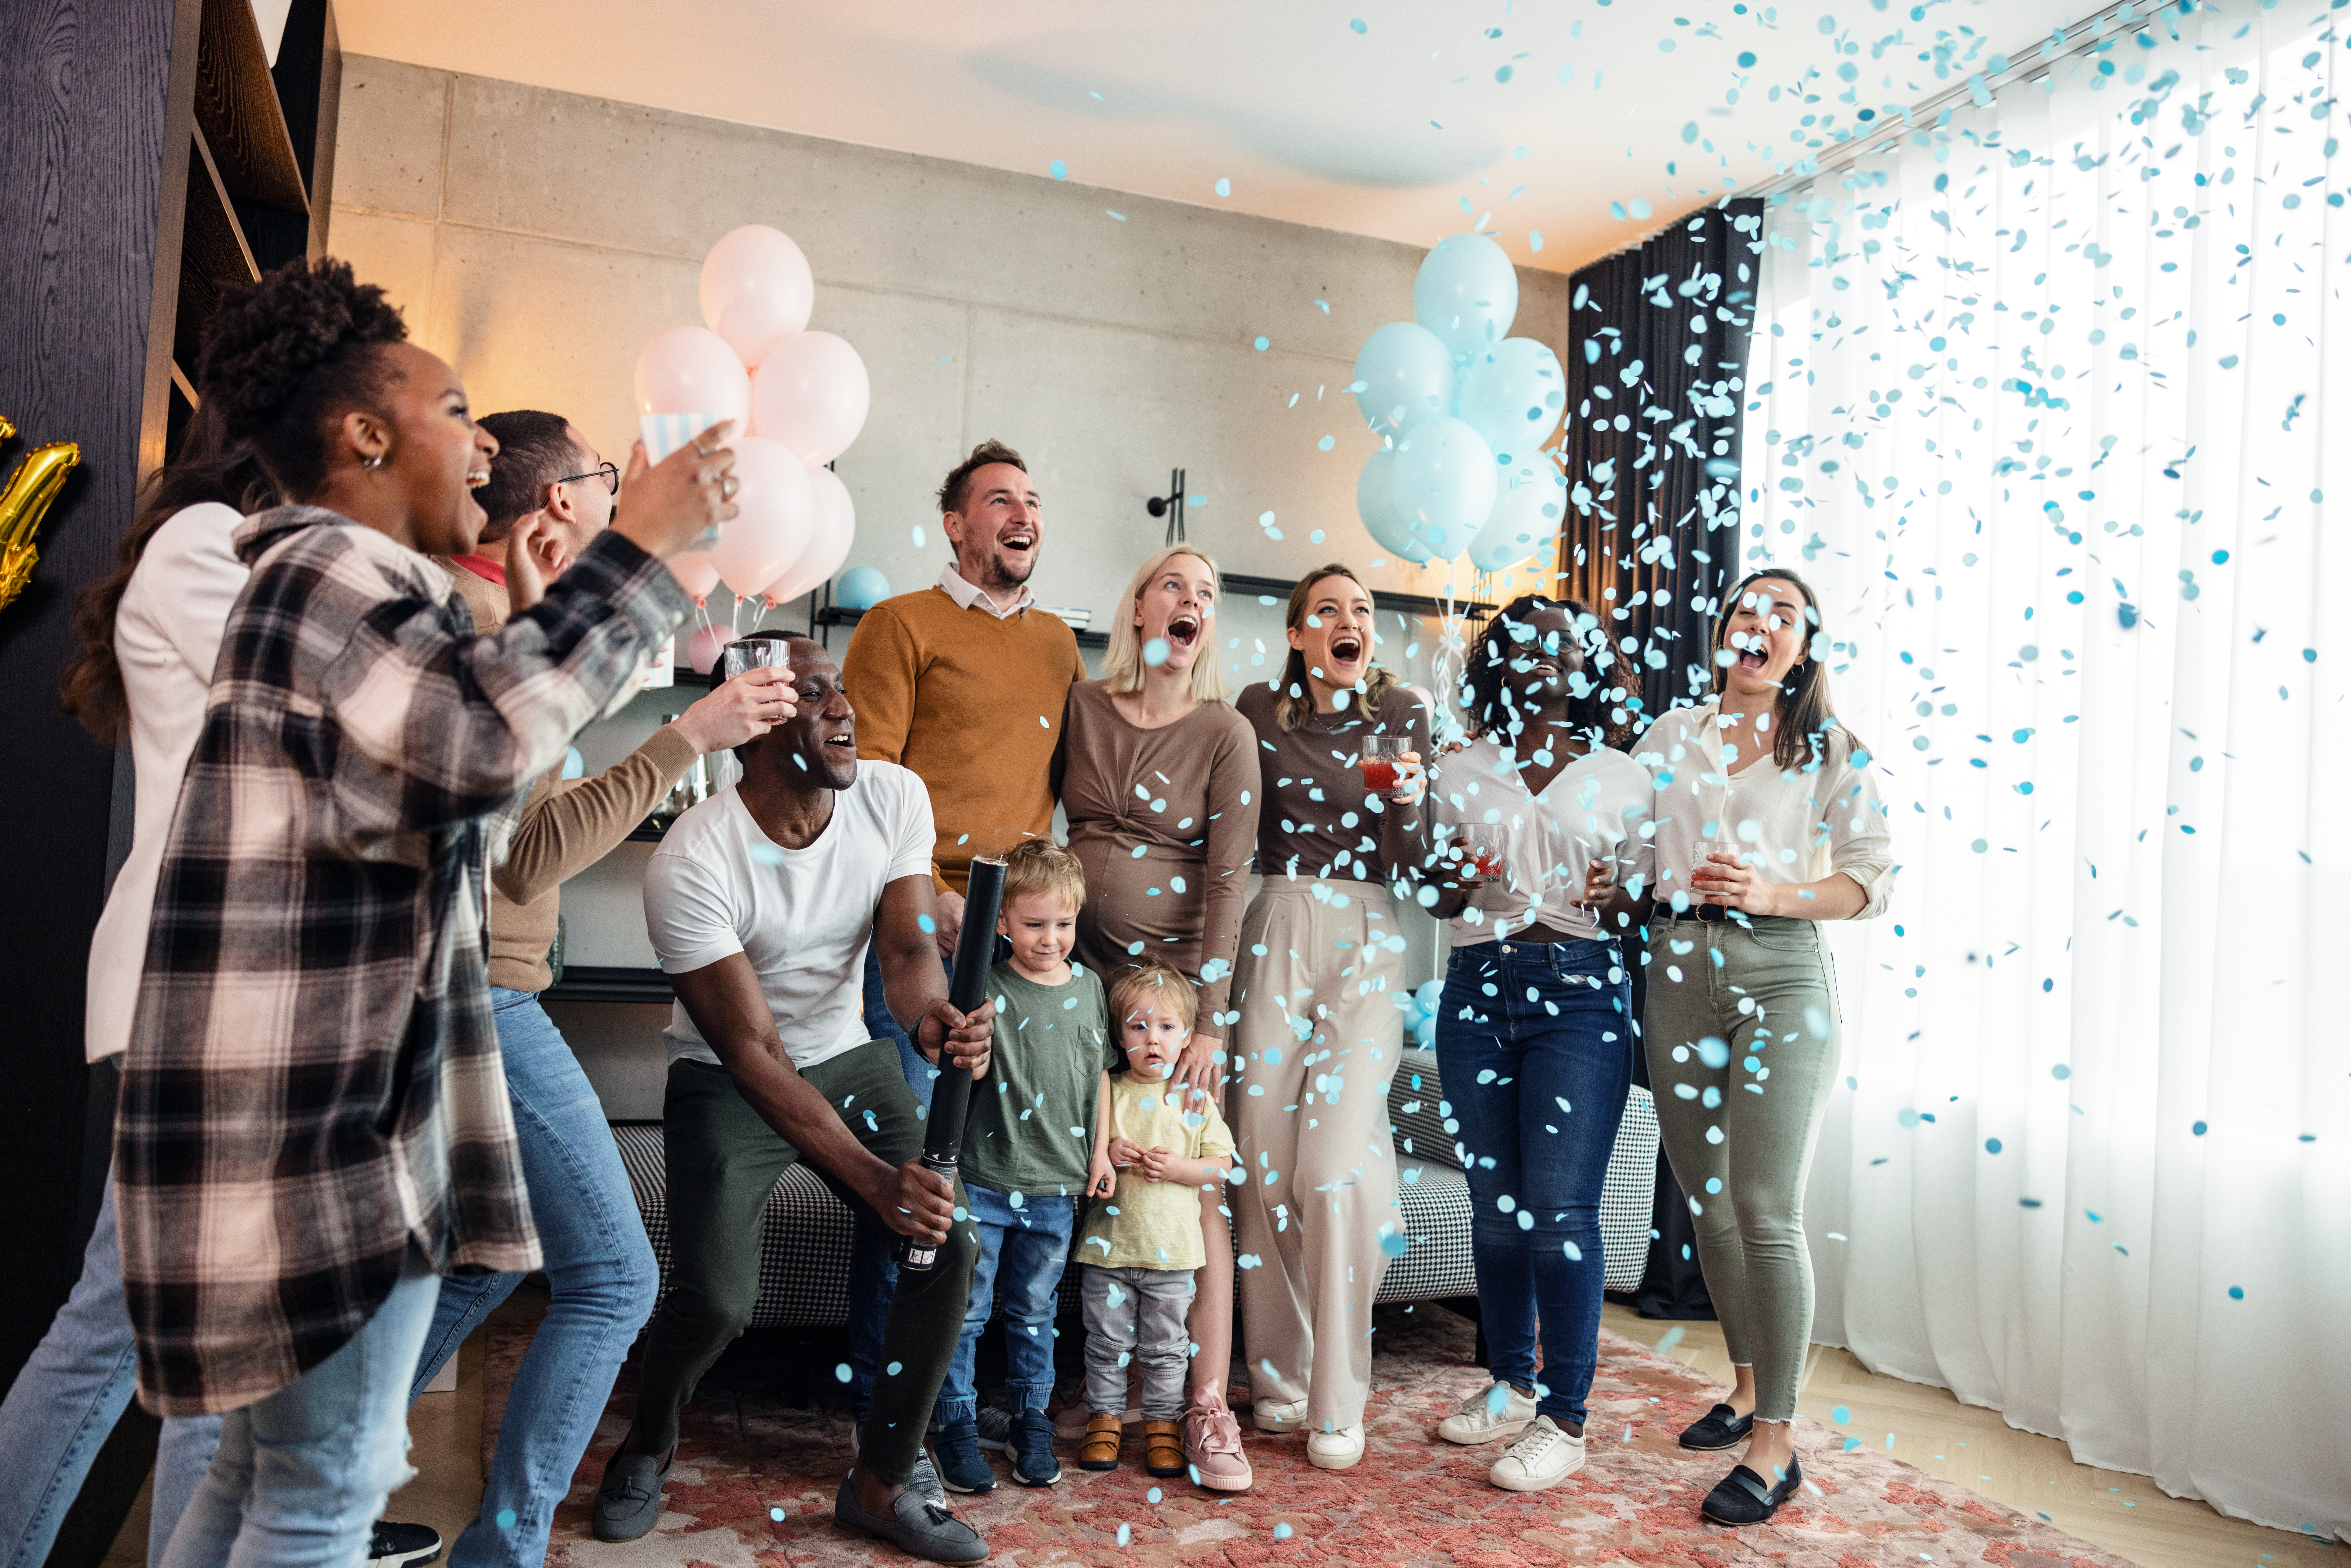 Confetti falling at a gender reveal party | Source: Getty Images